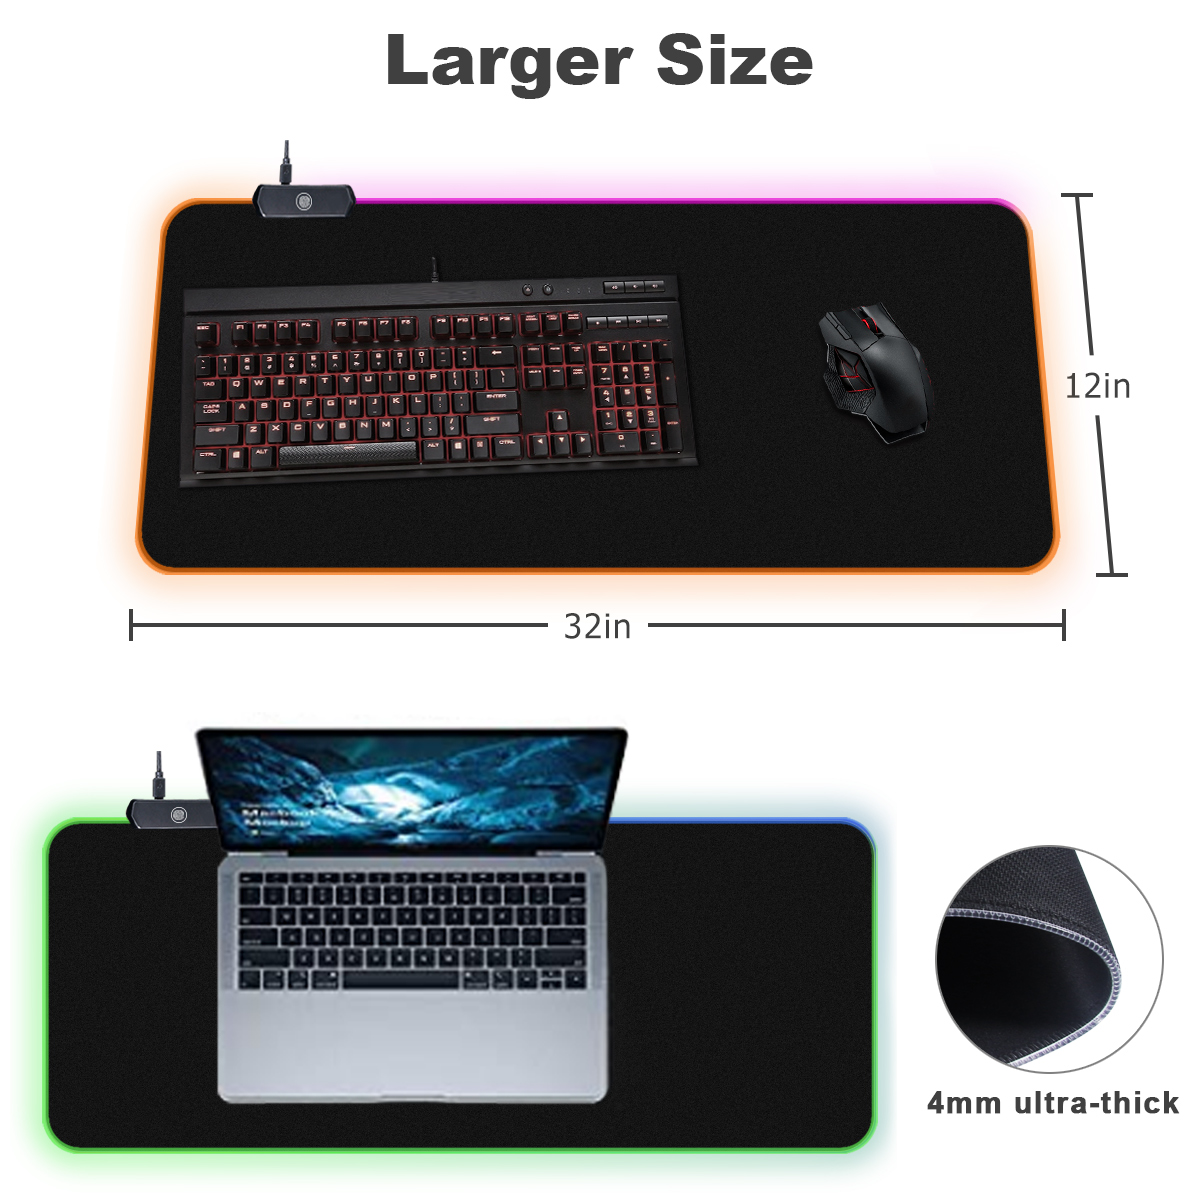 RGB Mouse Pad, RGB Gaming Mouse Pad, Large Mouse Pad, Extended Mouse Pad, 32" x 12" Long Computer Mouse Pad w/ Non-Slip Rubber Base, Smooth Surface Waterproof Keyboard Mouse Pad w/ USB Port - image 3 of 8